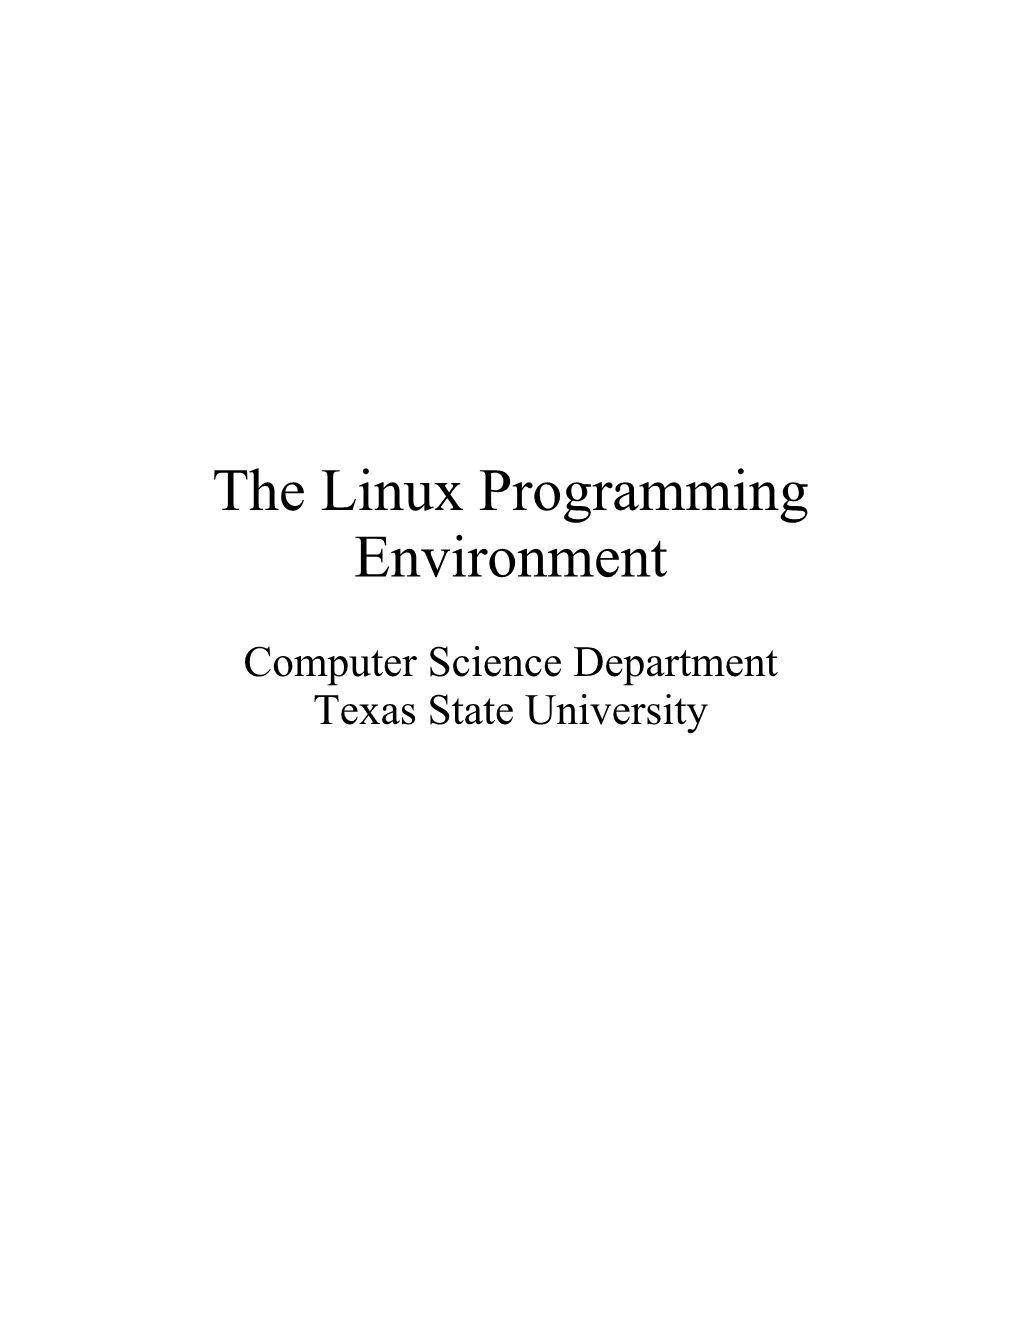 The Linux Programming Environment